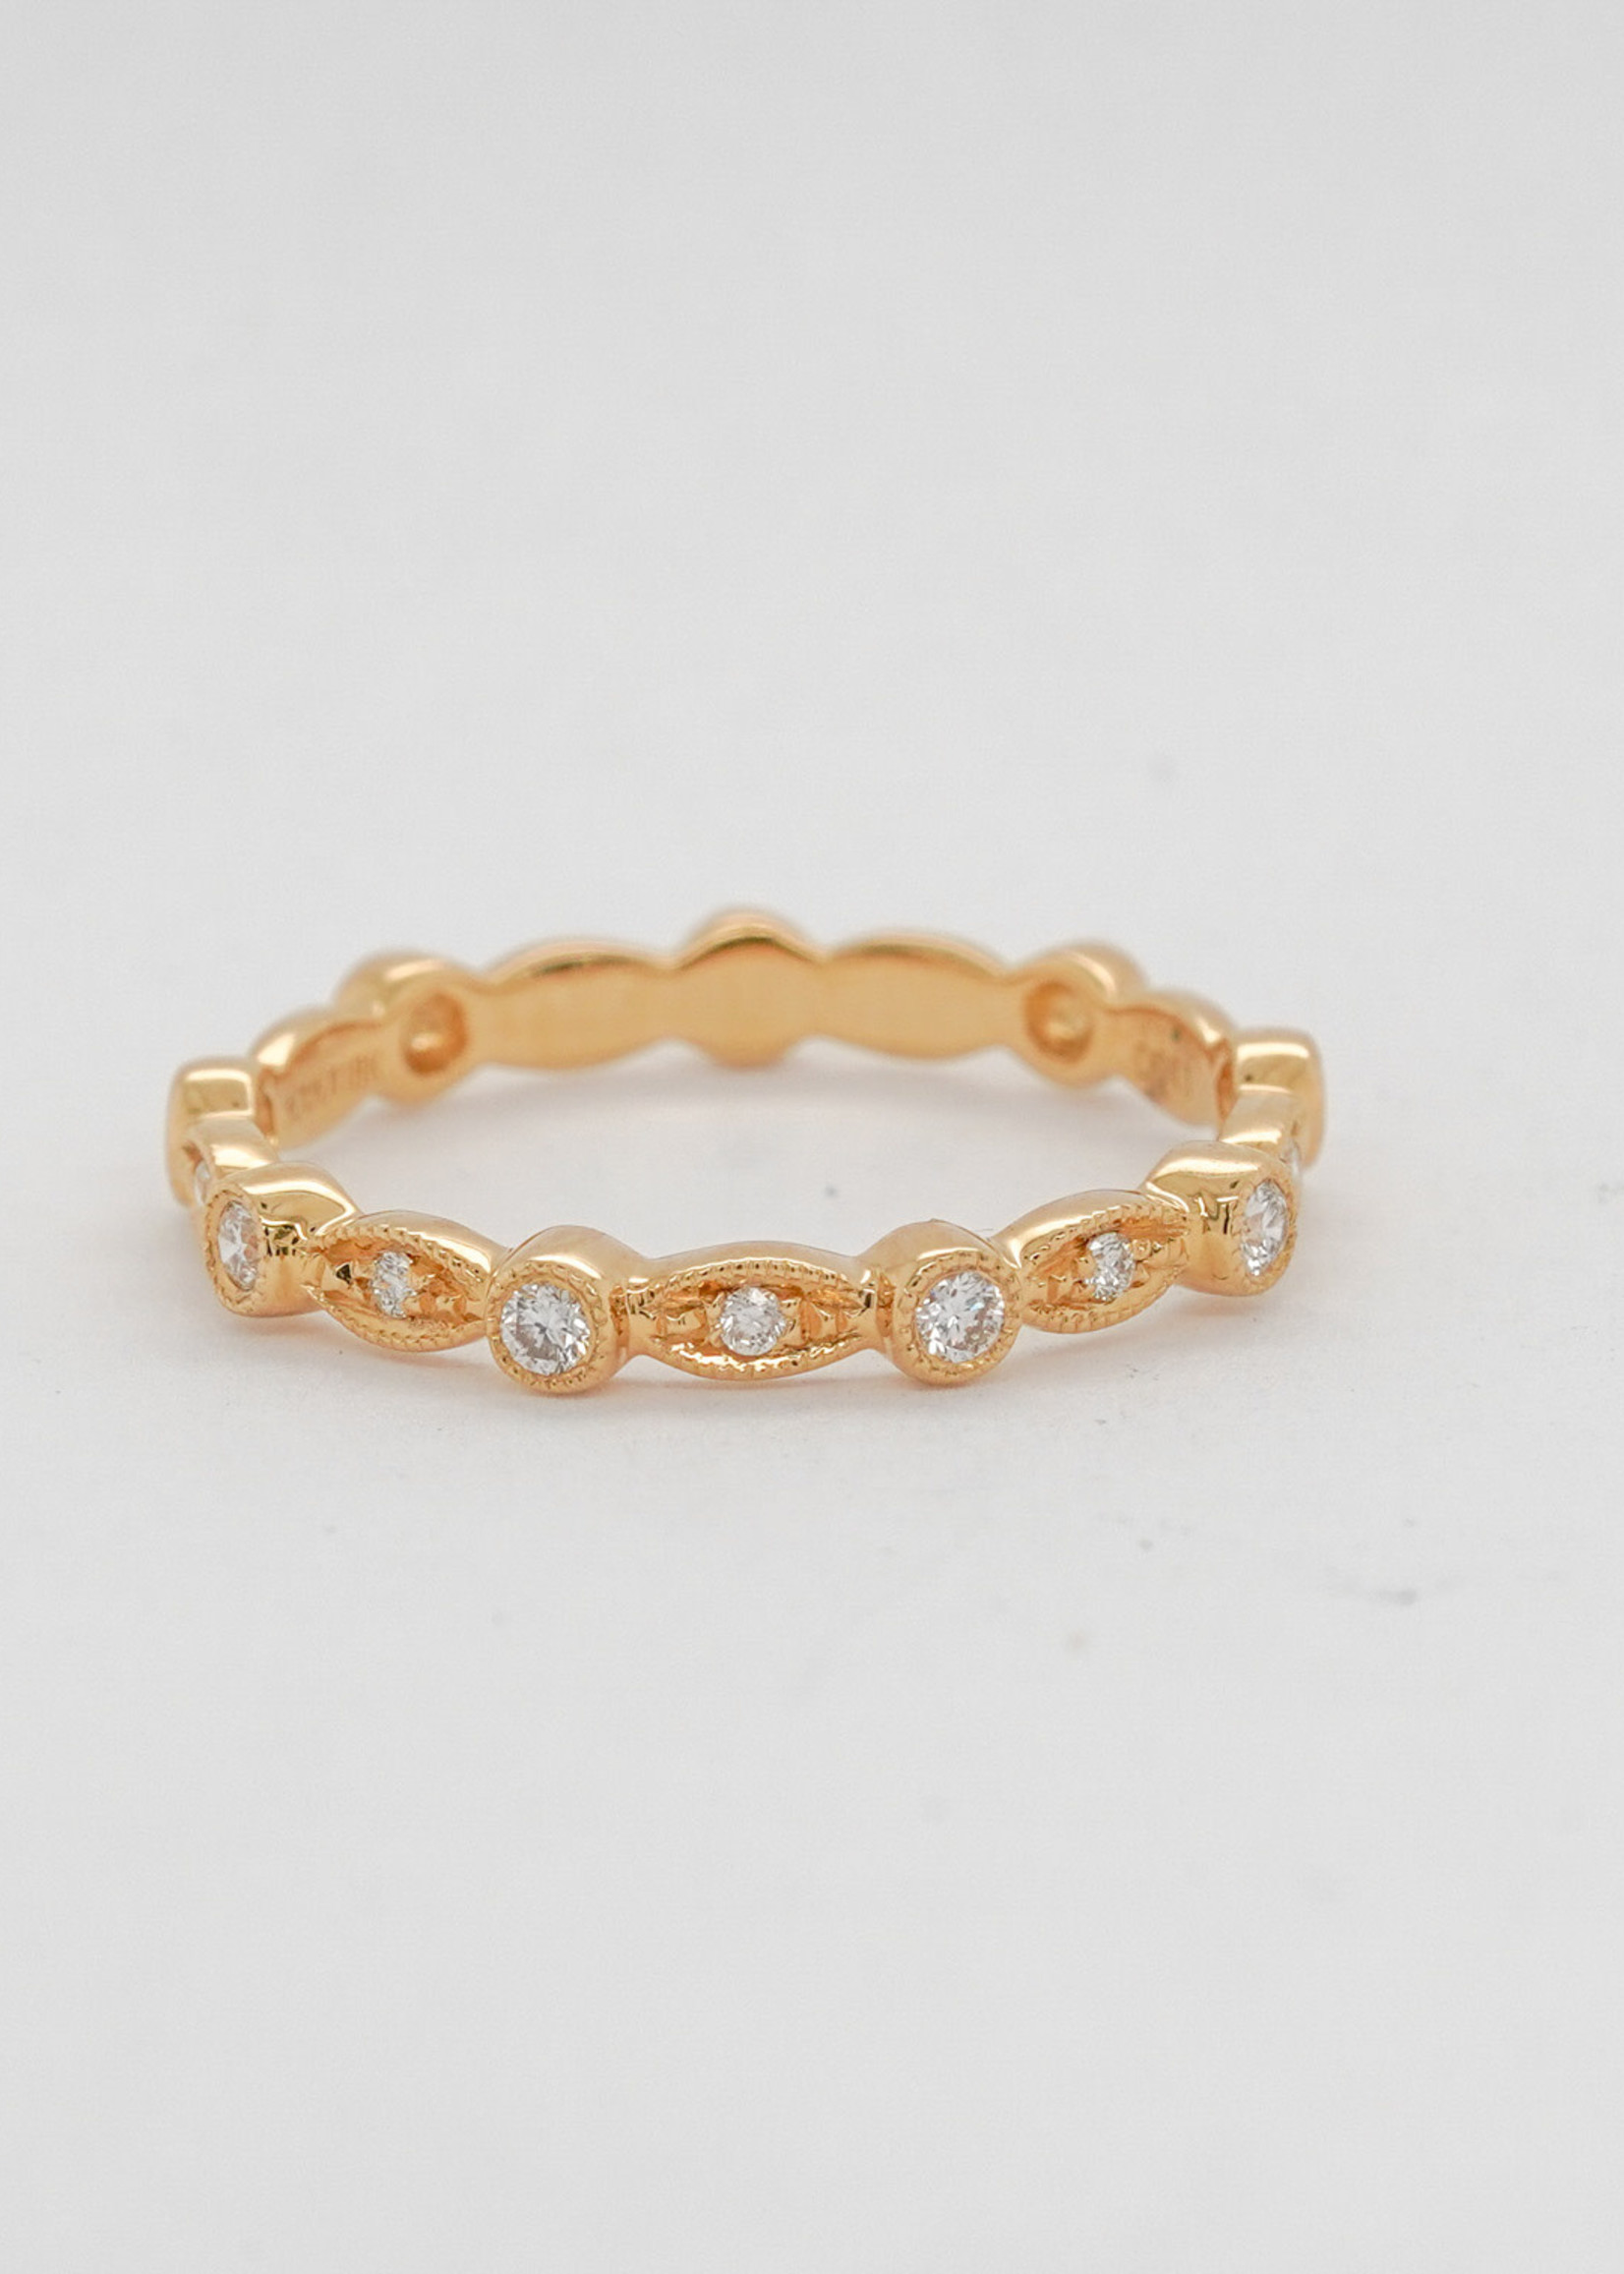 18KY 2.07g .24ctw Diamond Stackable Band (size 6.5)